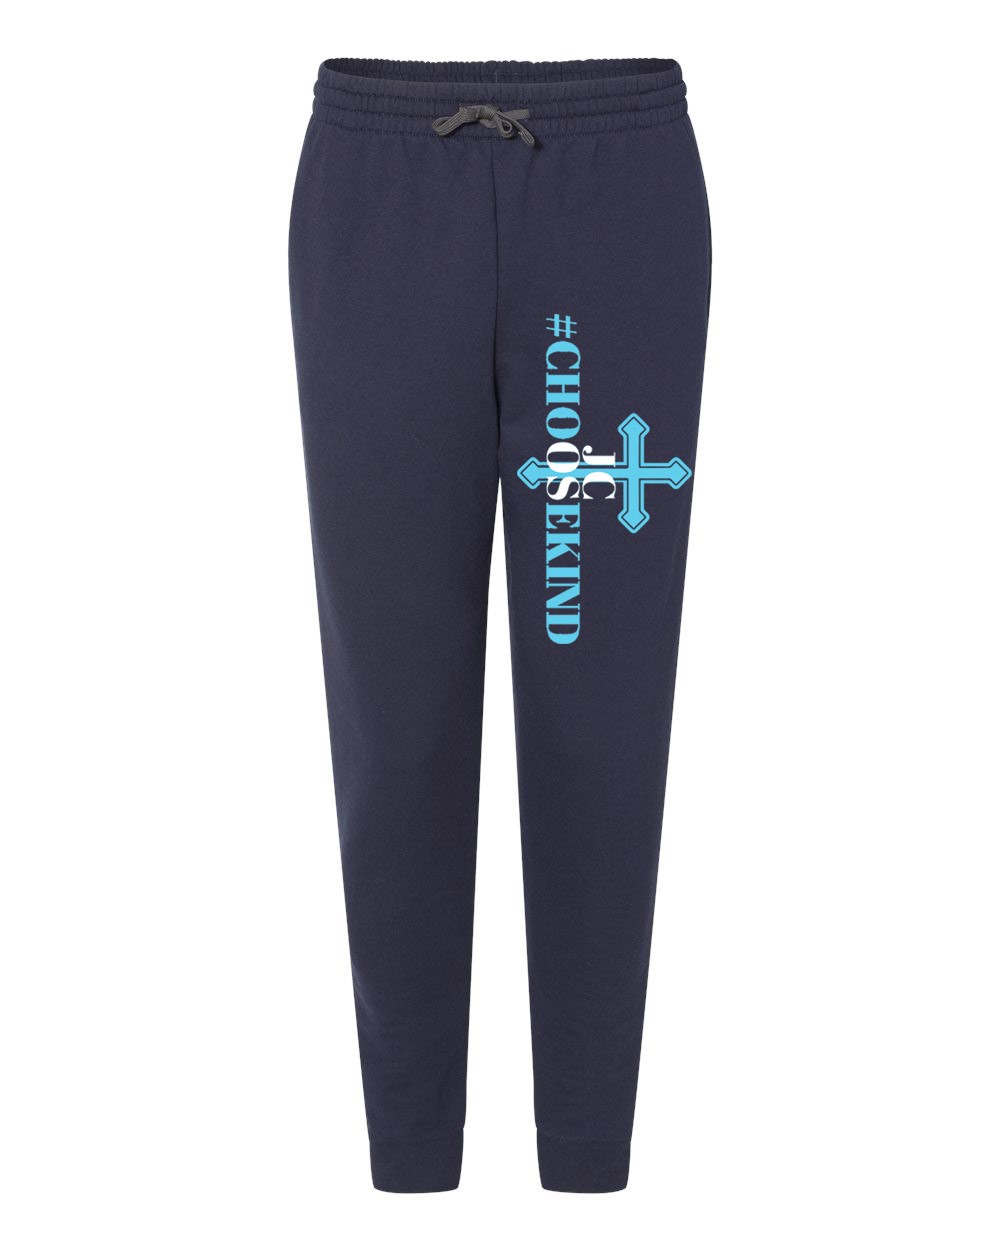 JCOS Spirit Joggers w/ Choose Kindness Logo - Please Allow 2-3 Weeks for Delivery